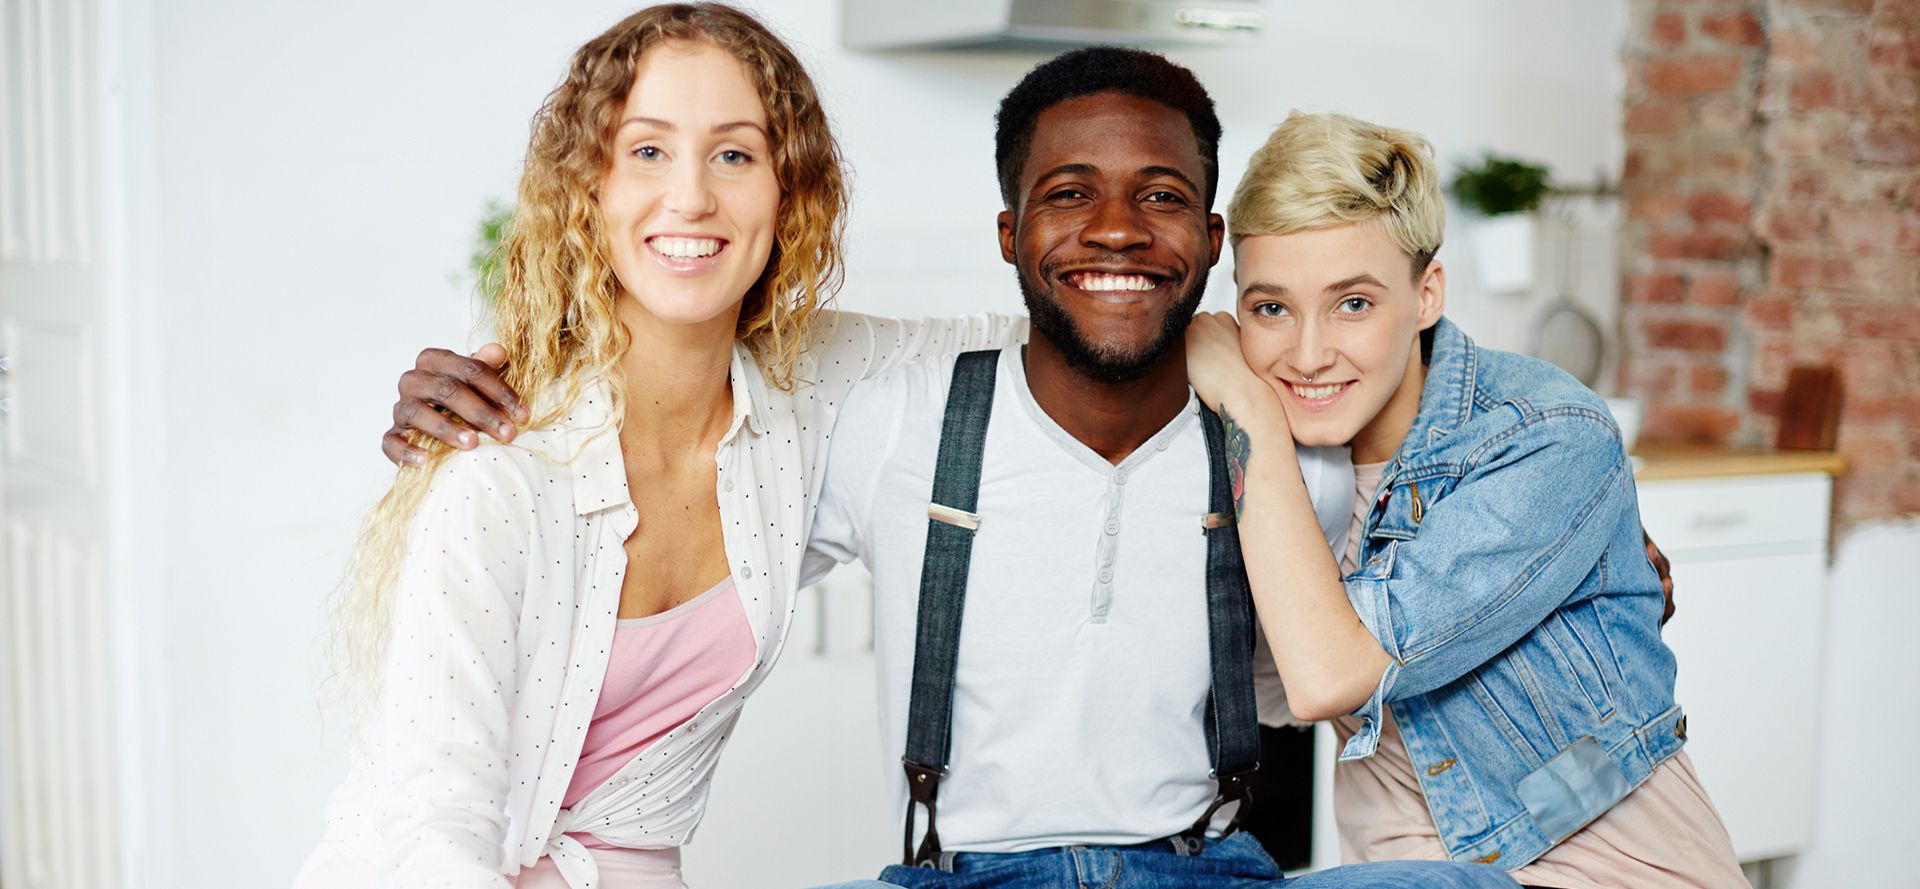 A black man and two girls are smiling.